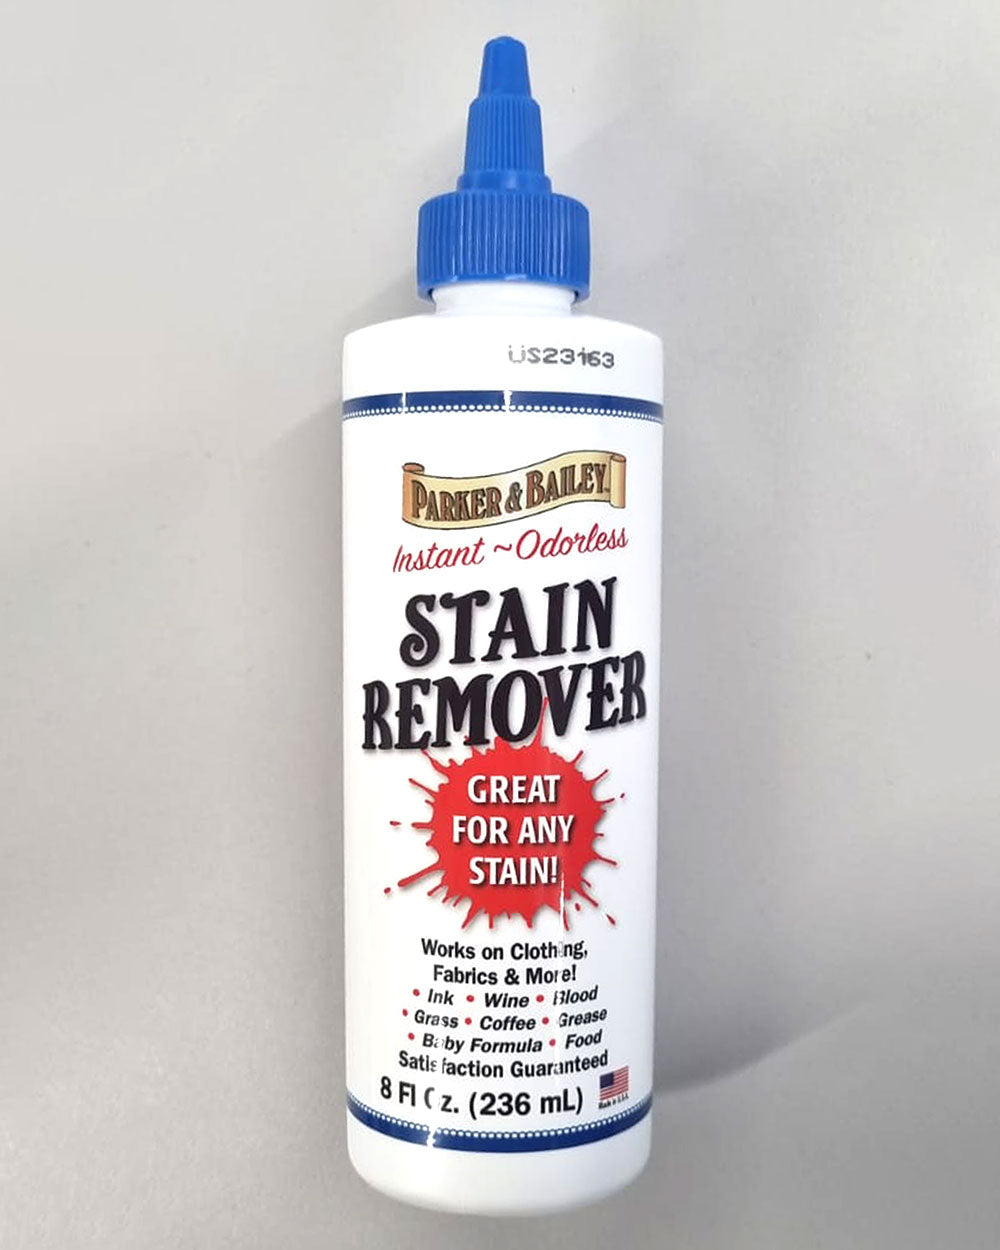 Stain Remover Stain Medic Parker & Bailey